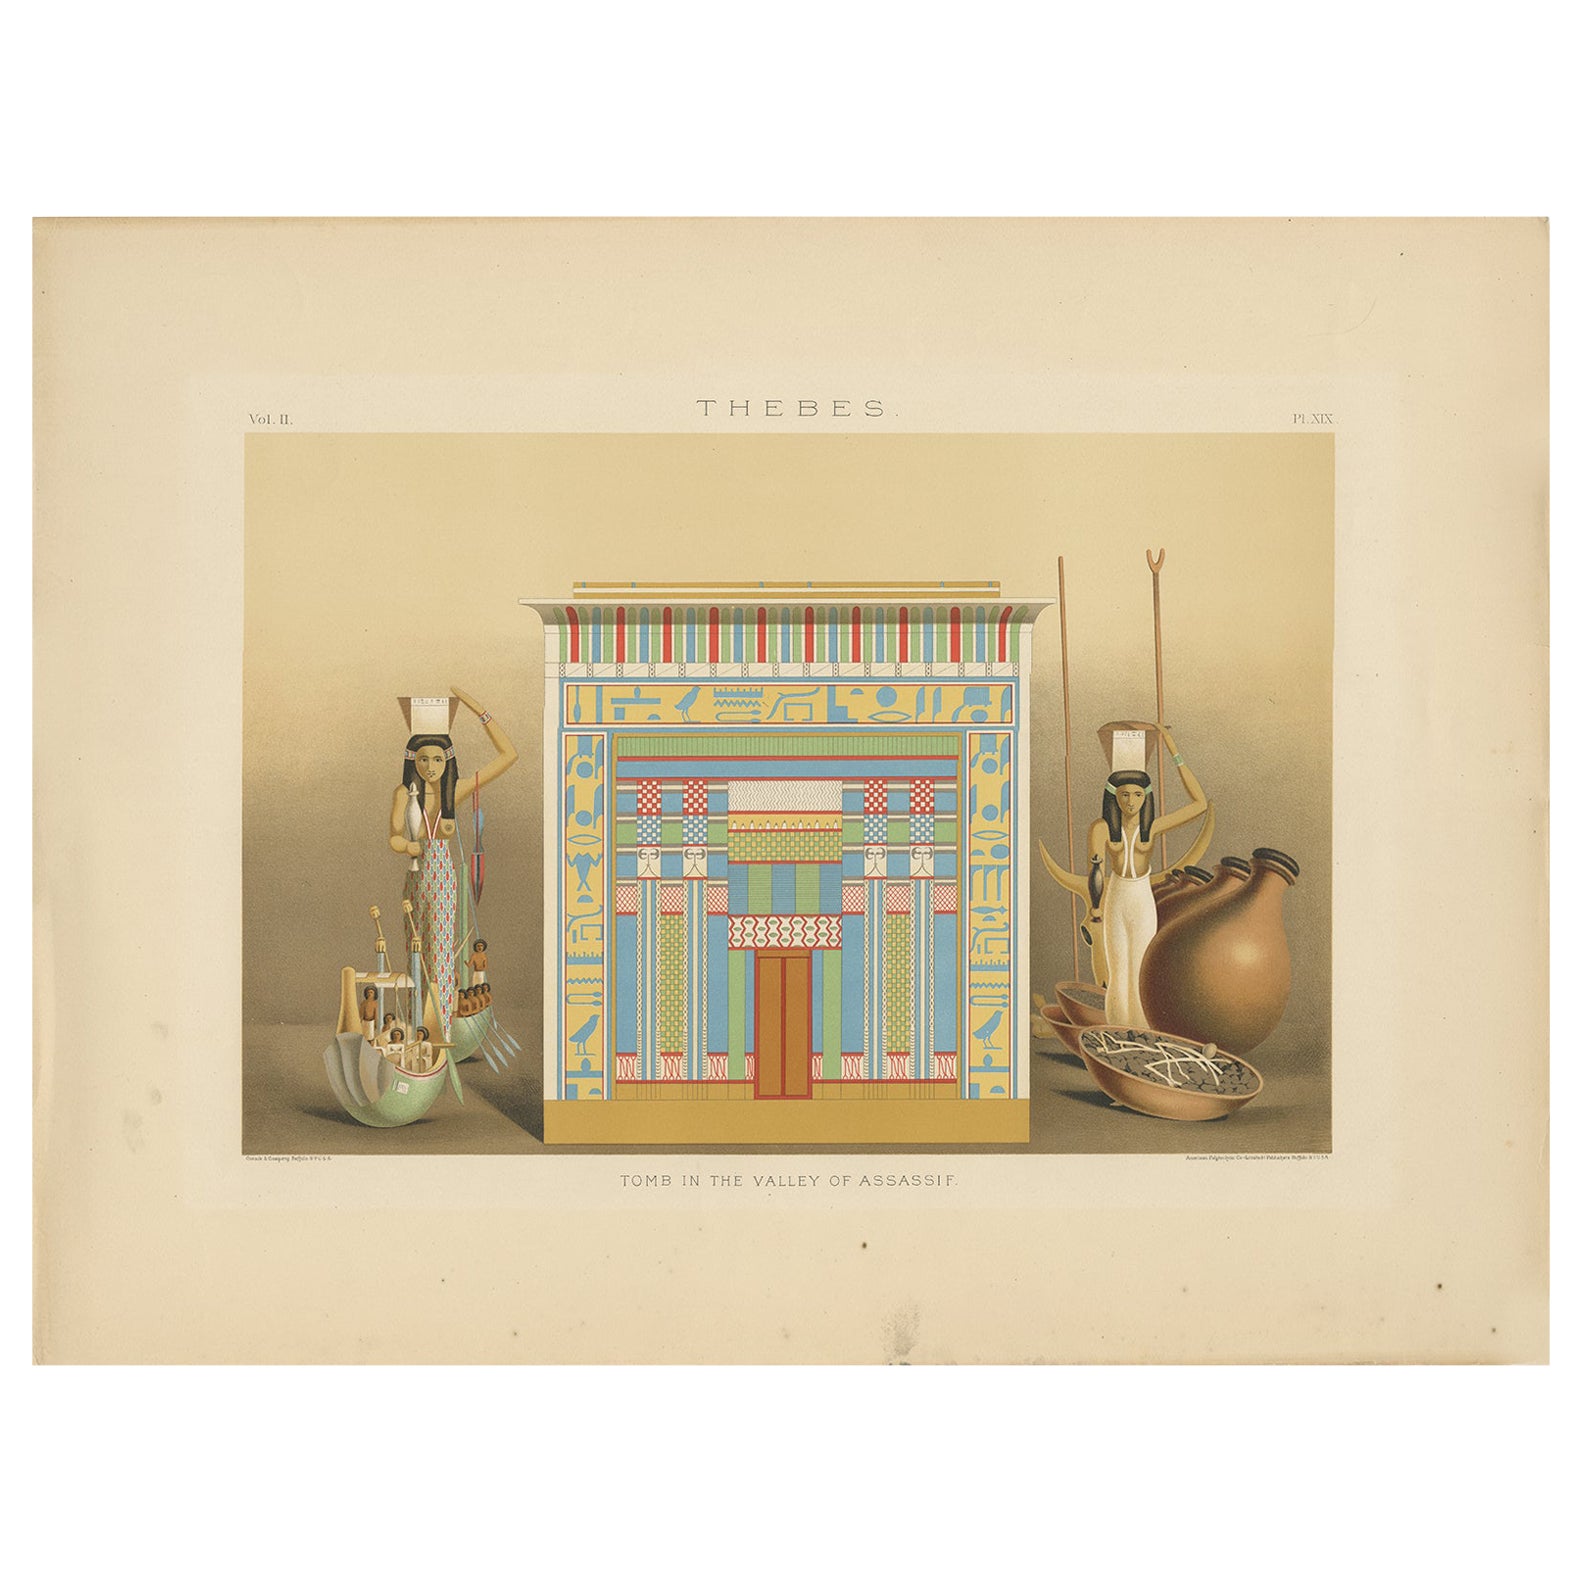 Antique Print of the Tomb in the Valley of Assassif by Binion, 1887